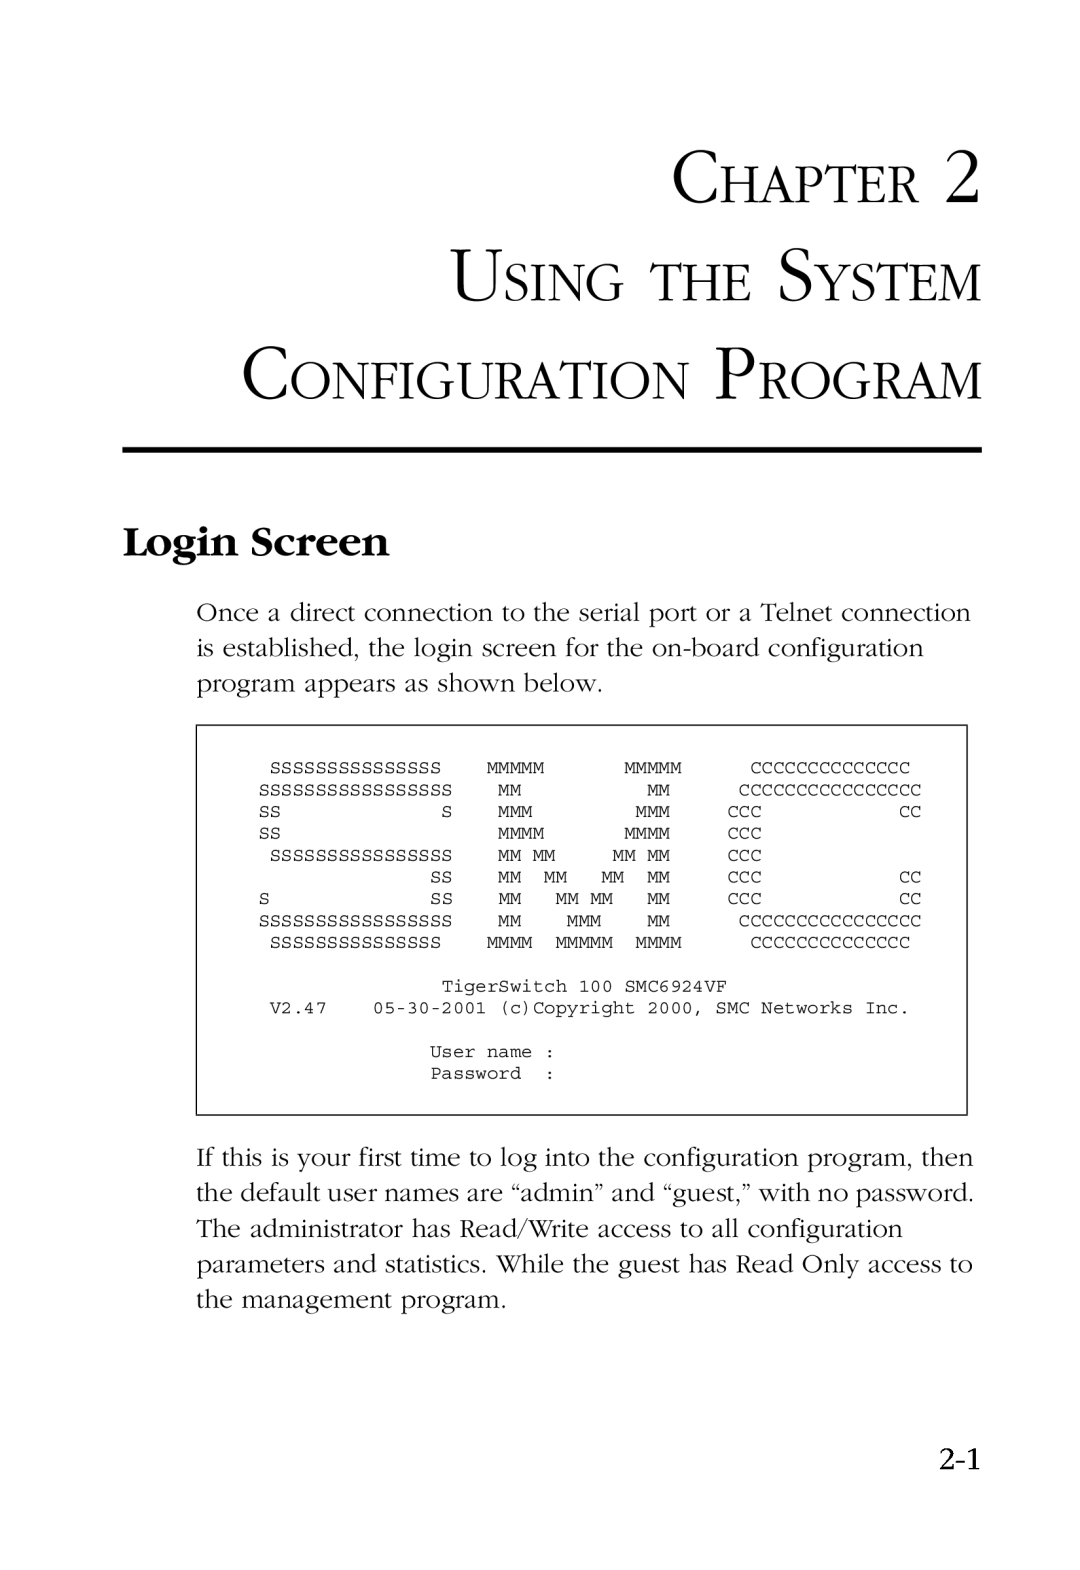 SMC Networks SMC6924VF manual Chapter Using The System Configuration Program, Login Screen 